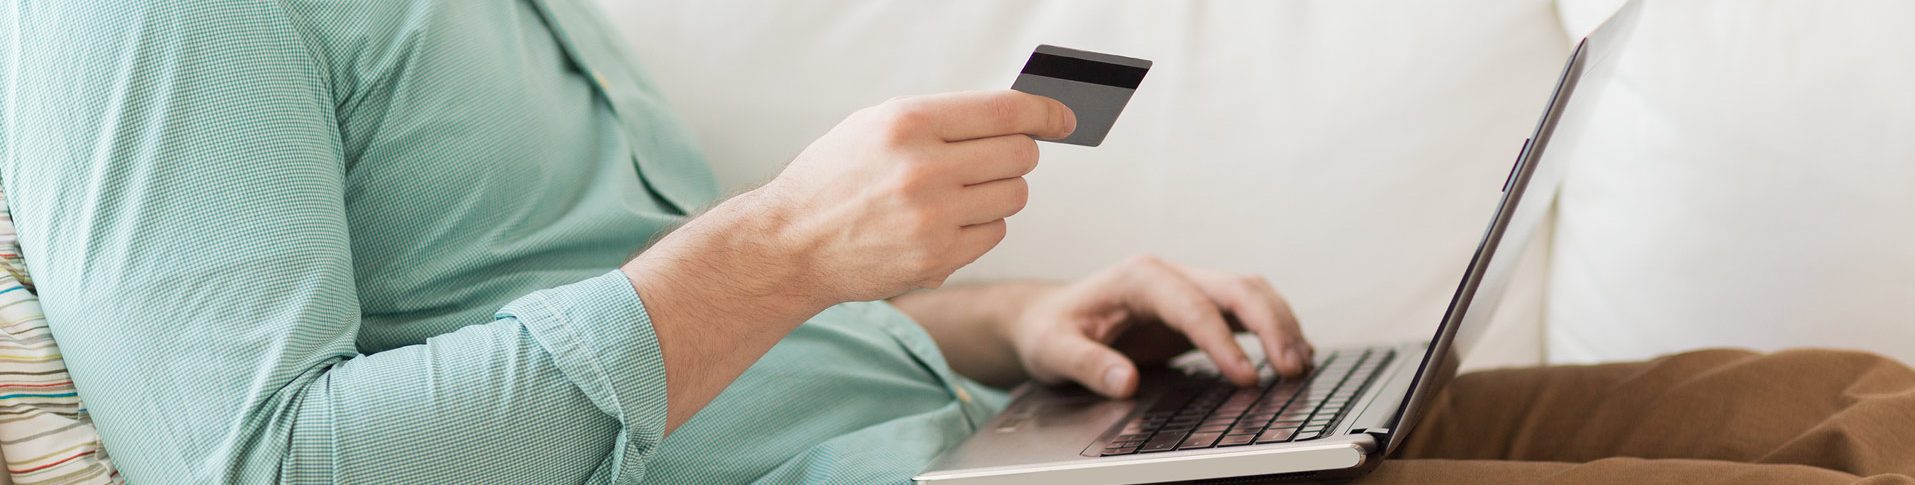 A man sitting on a couch makes a credit card payment on a computer